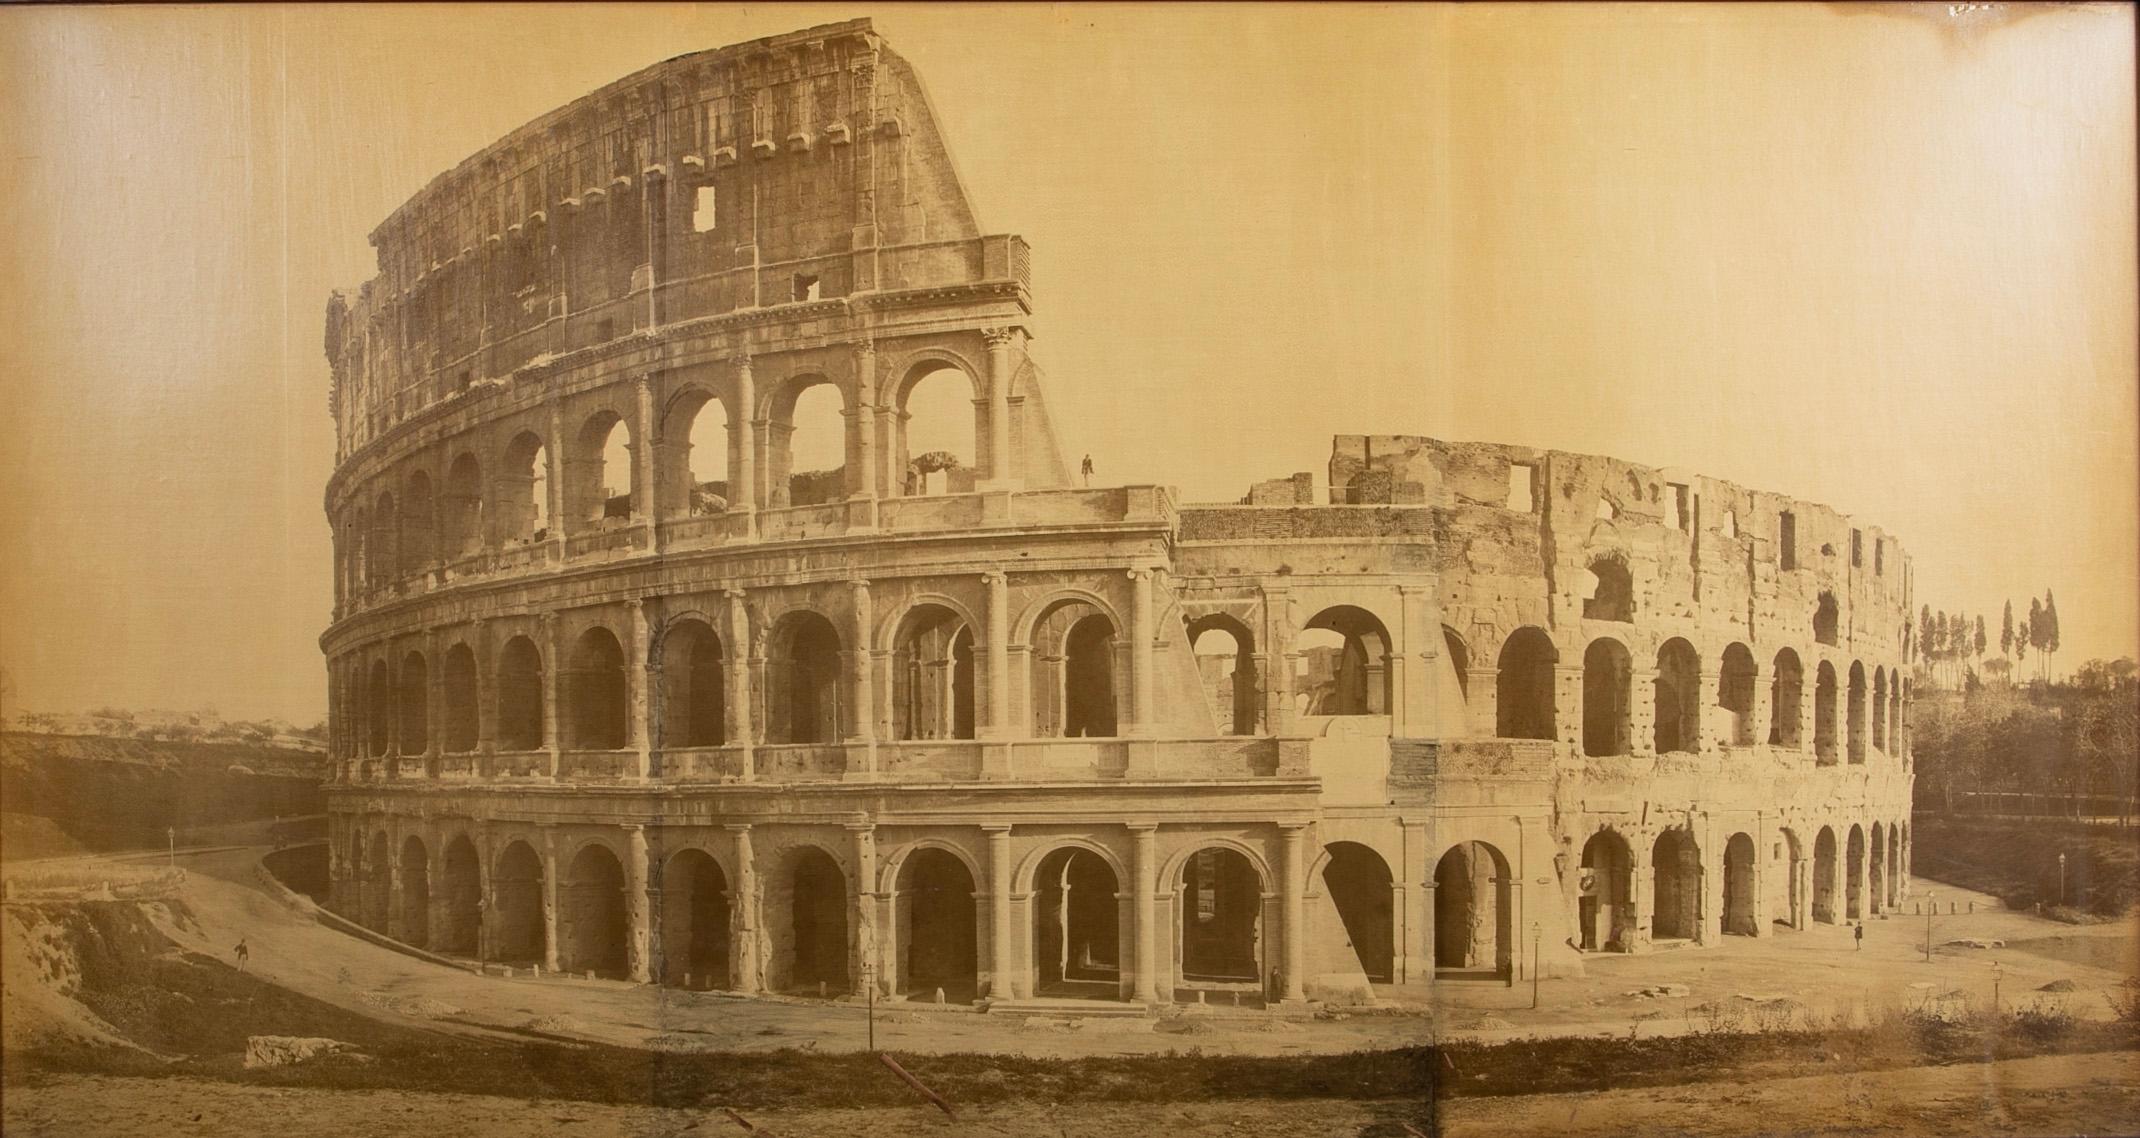 Fantastic large scale 19th century Grand Tour image of the Roman Colosseum in the original oak frame, with the original glass! At over 5.5 feet wide this is an impressive piece. Quite rare to find one this large still intact. The image was so large